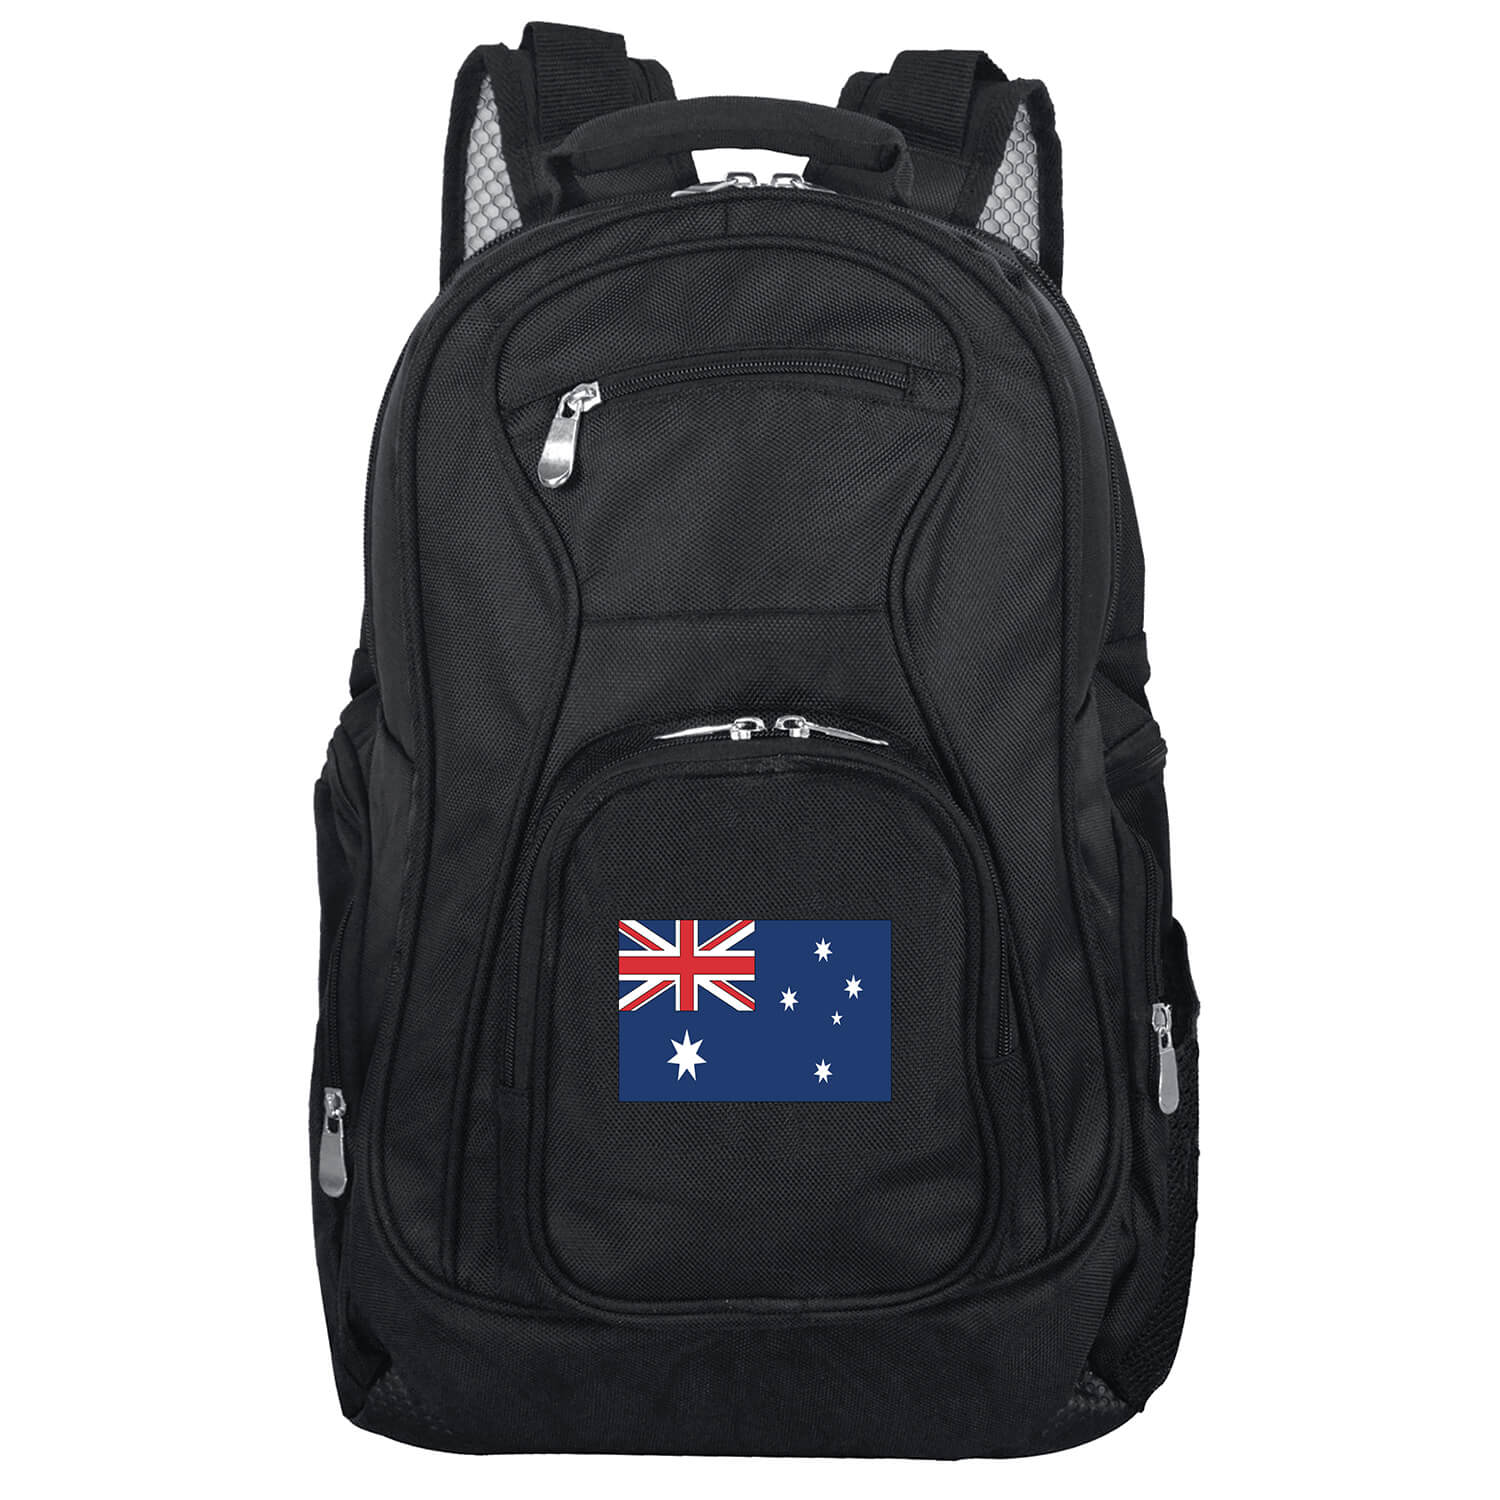 Team Australia Premium Laptop Backpack - Fits Most 17 Inch Laptops and Tablets - Ideal for Work, Travel, School, College, and Commuting